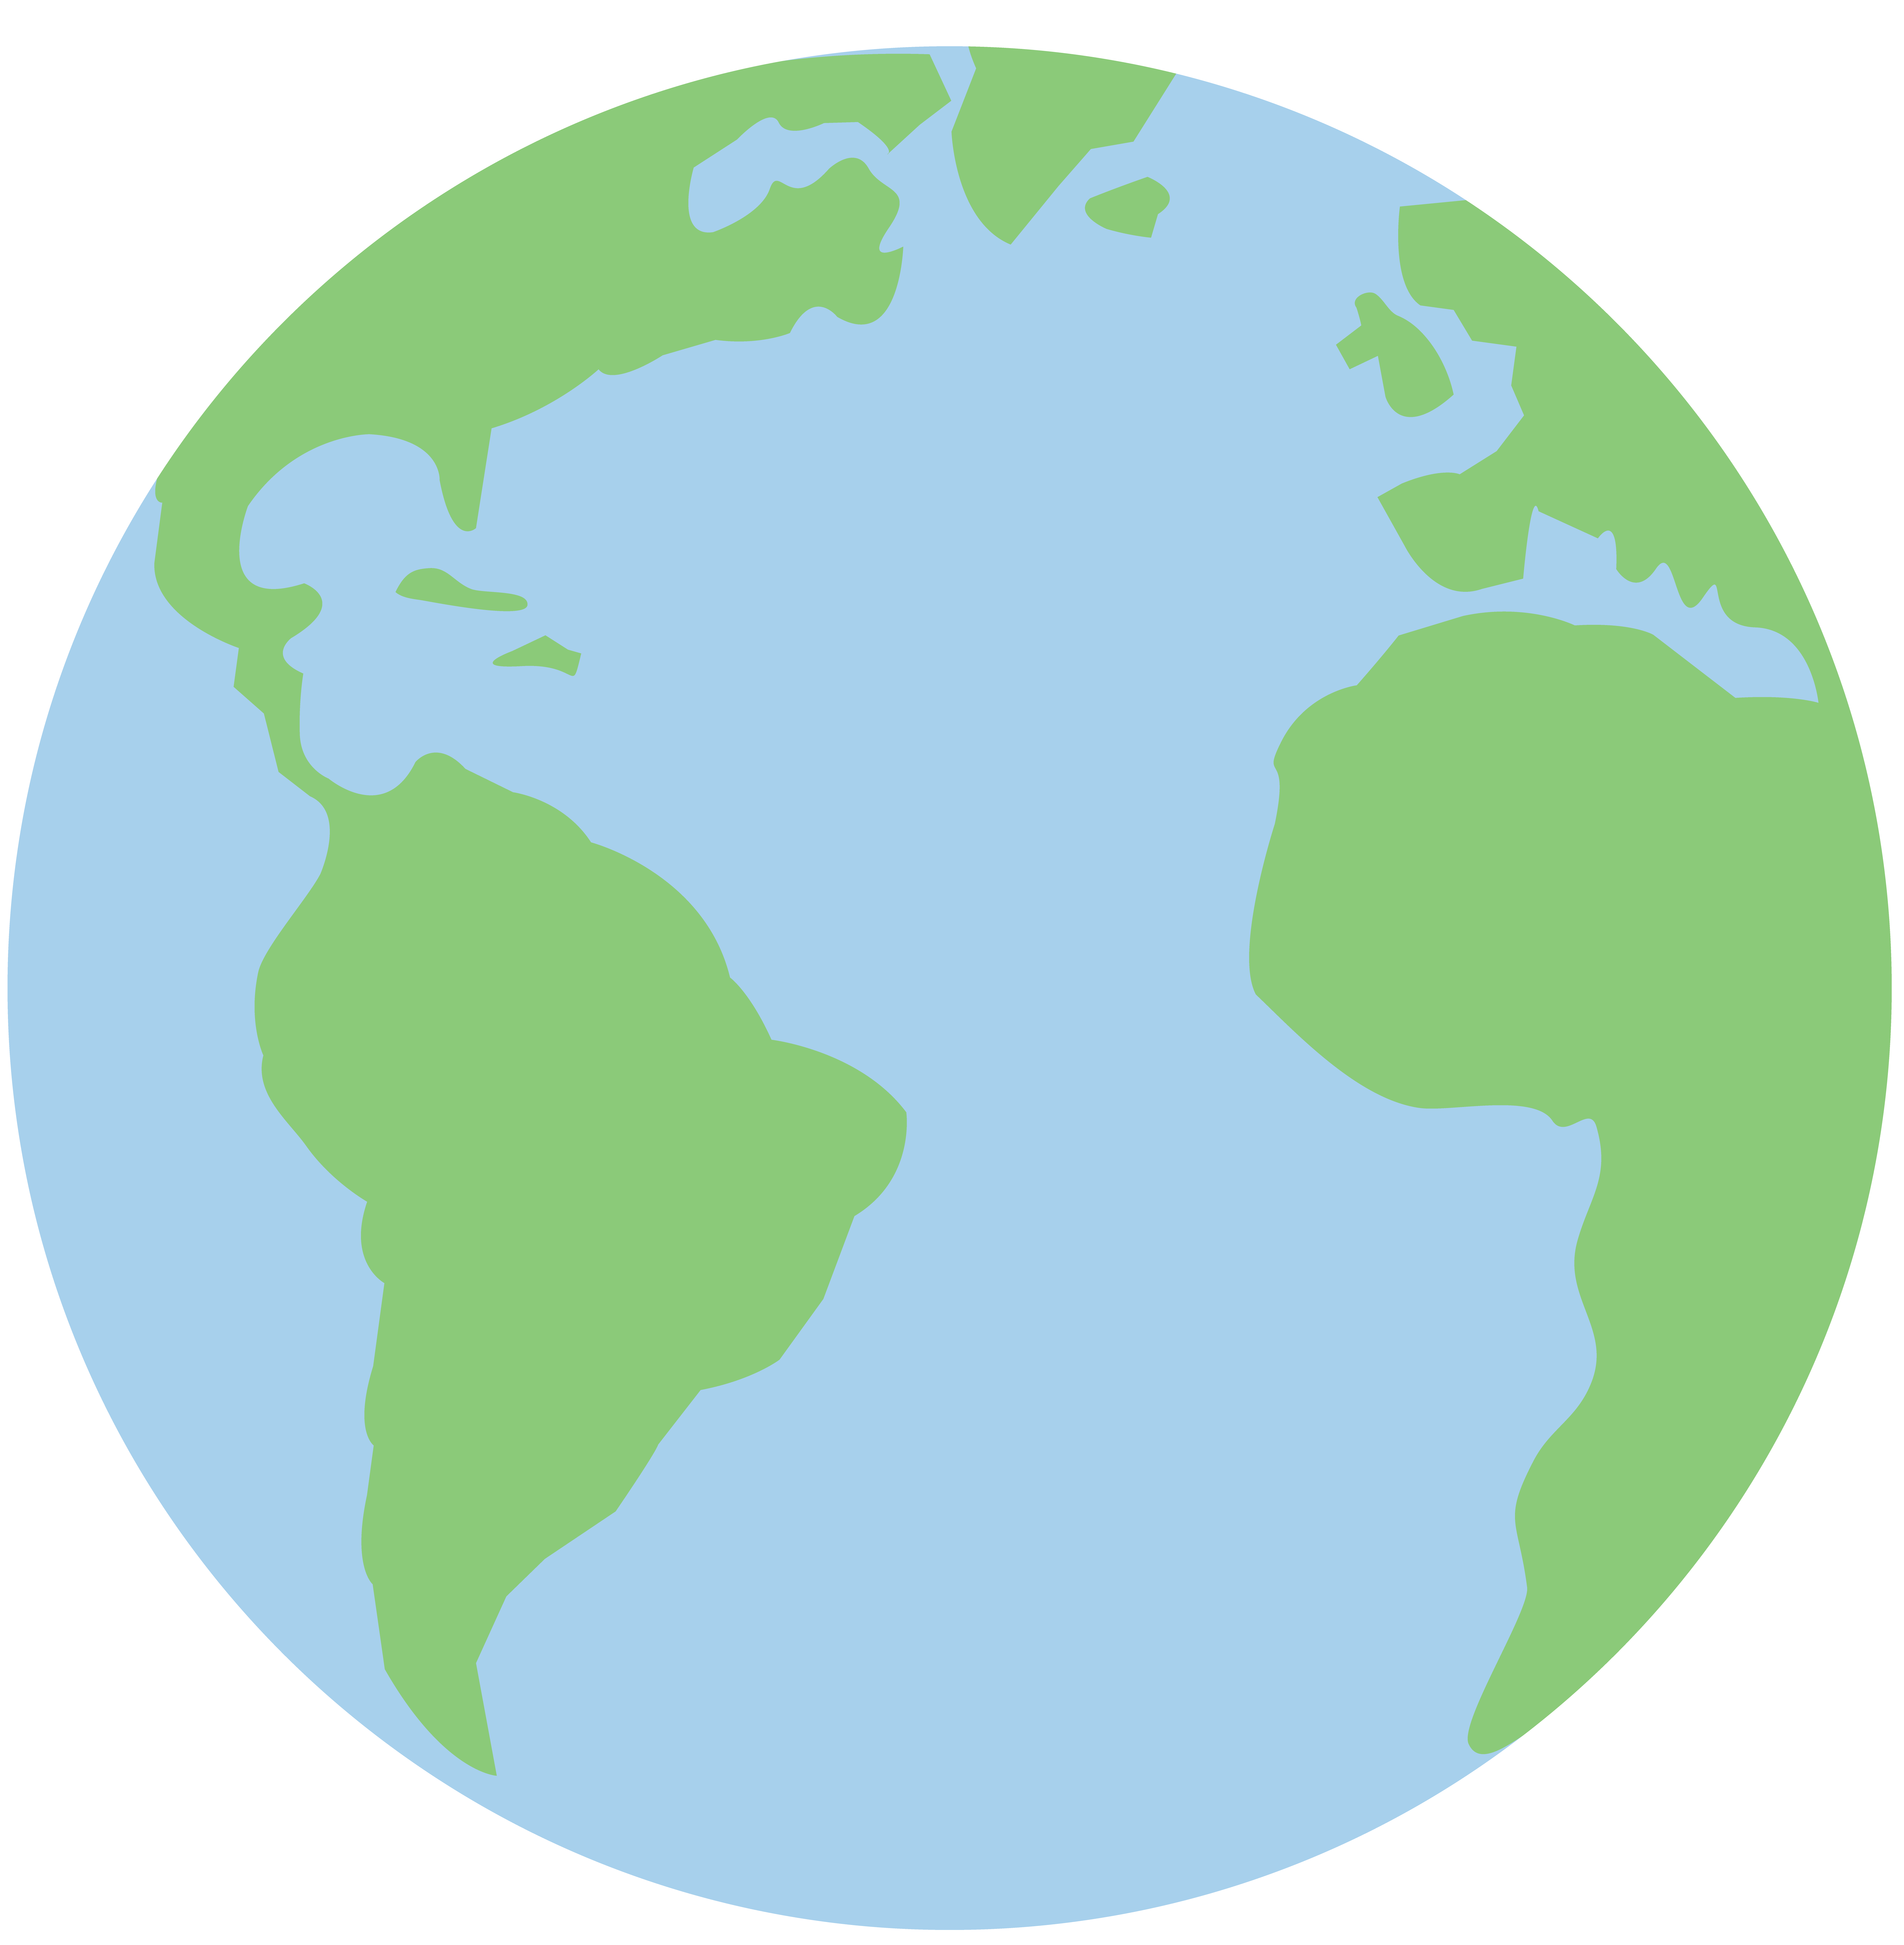 Planet Earth Design Png - ClipArt Best